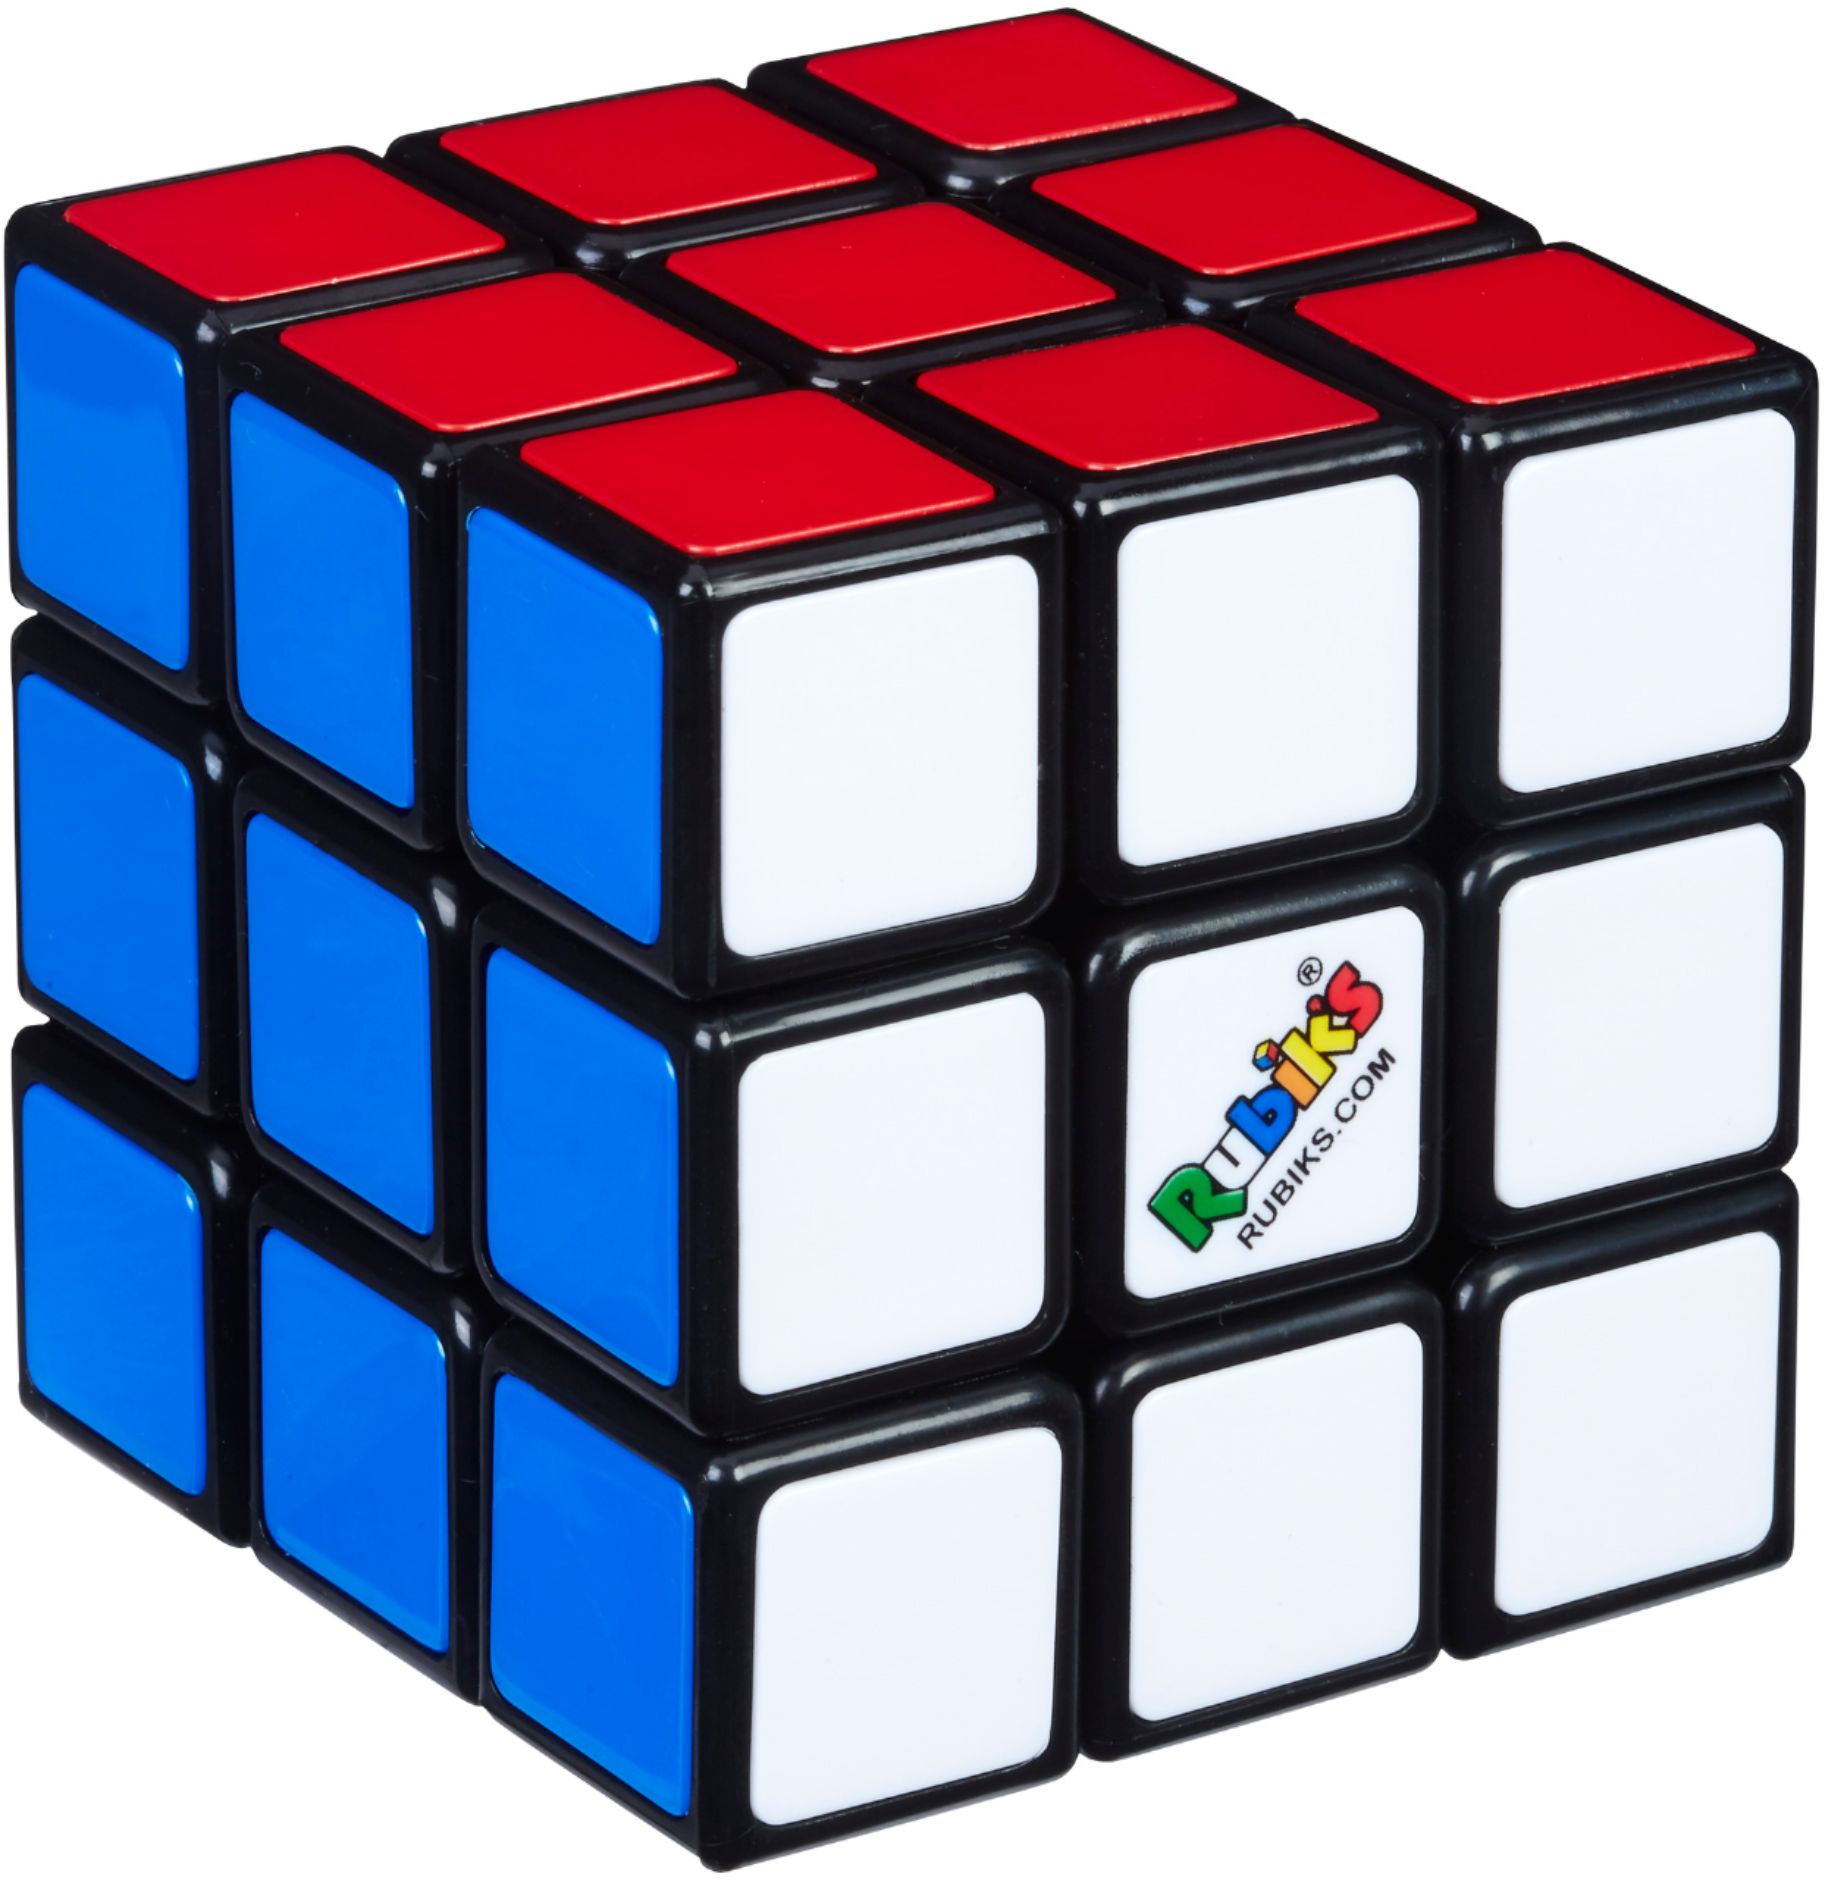 Questions and Answers: Hasbro Rubik's Cube Game Multi A9312 - Best Buy